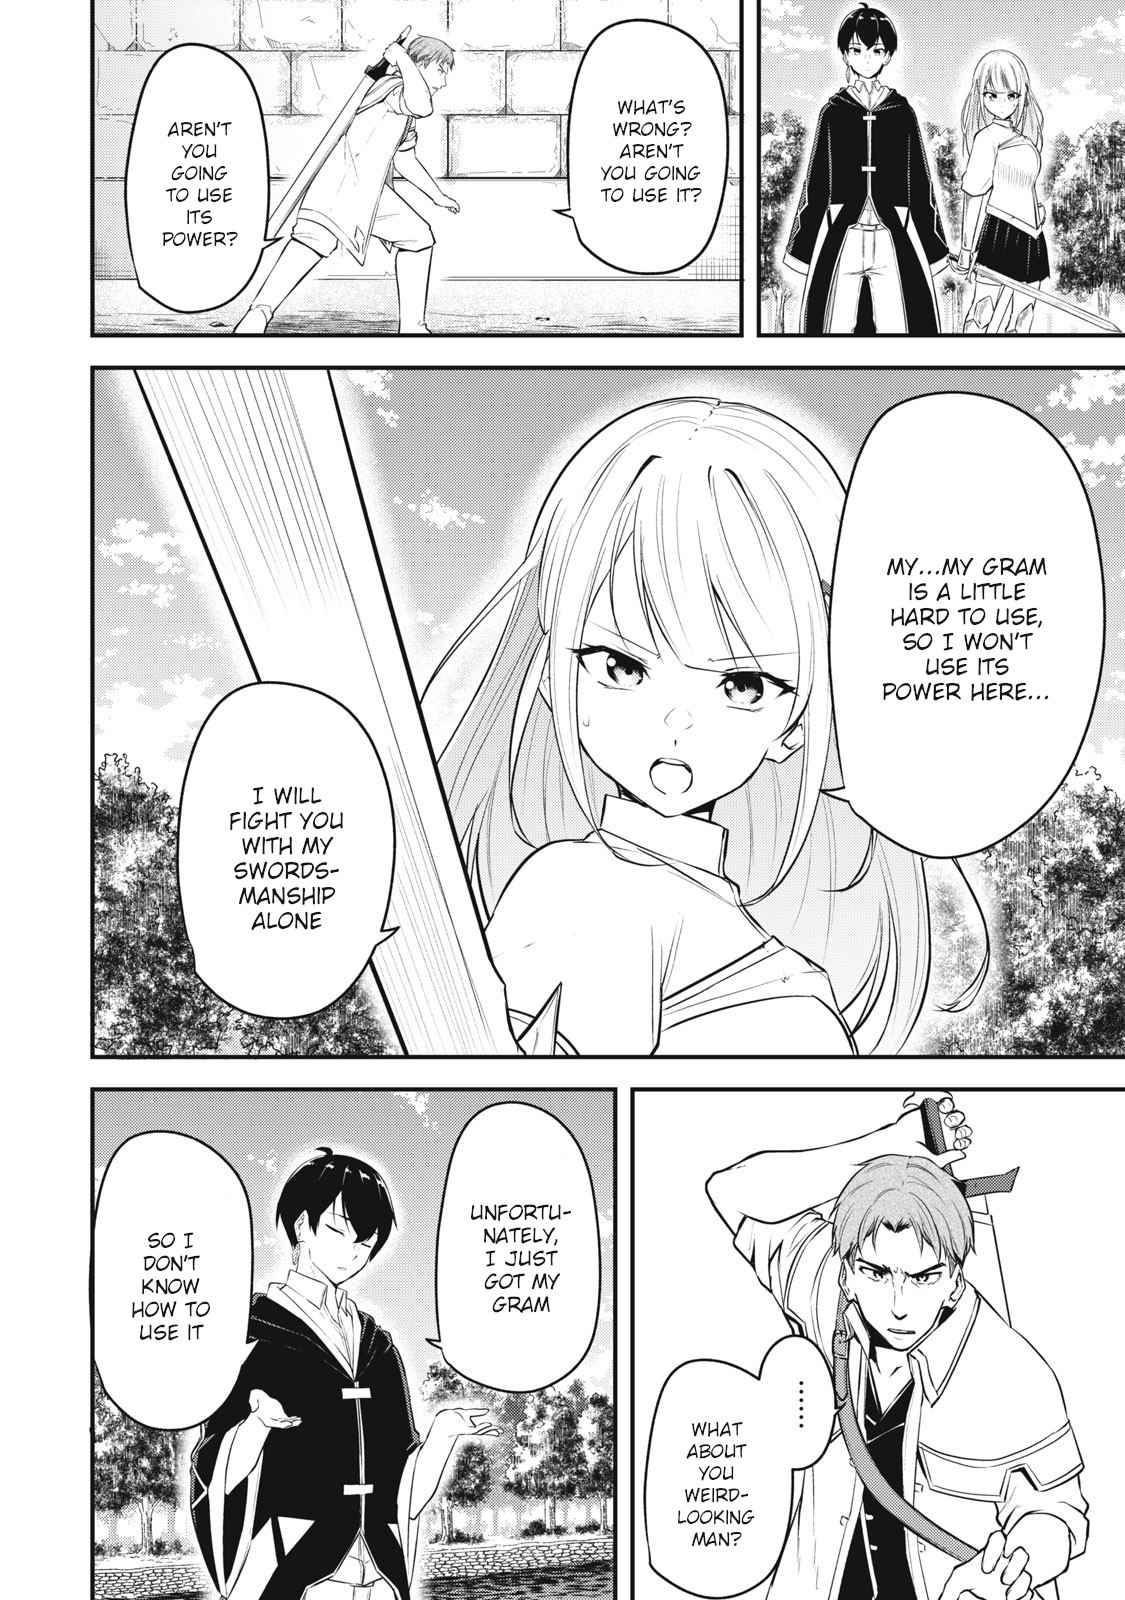 The Last Sage Of The Imperial Sword Academy - Page 2